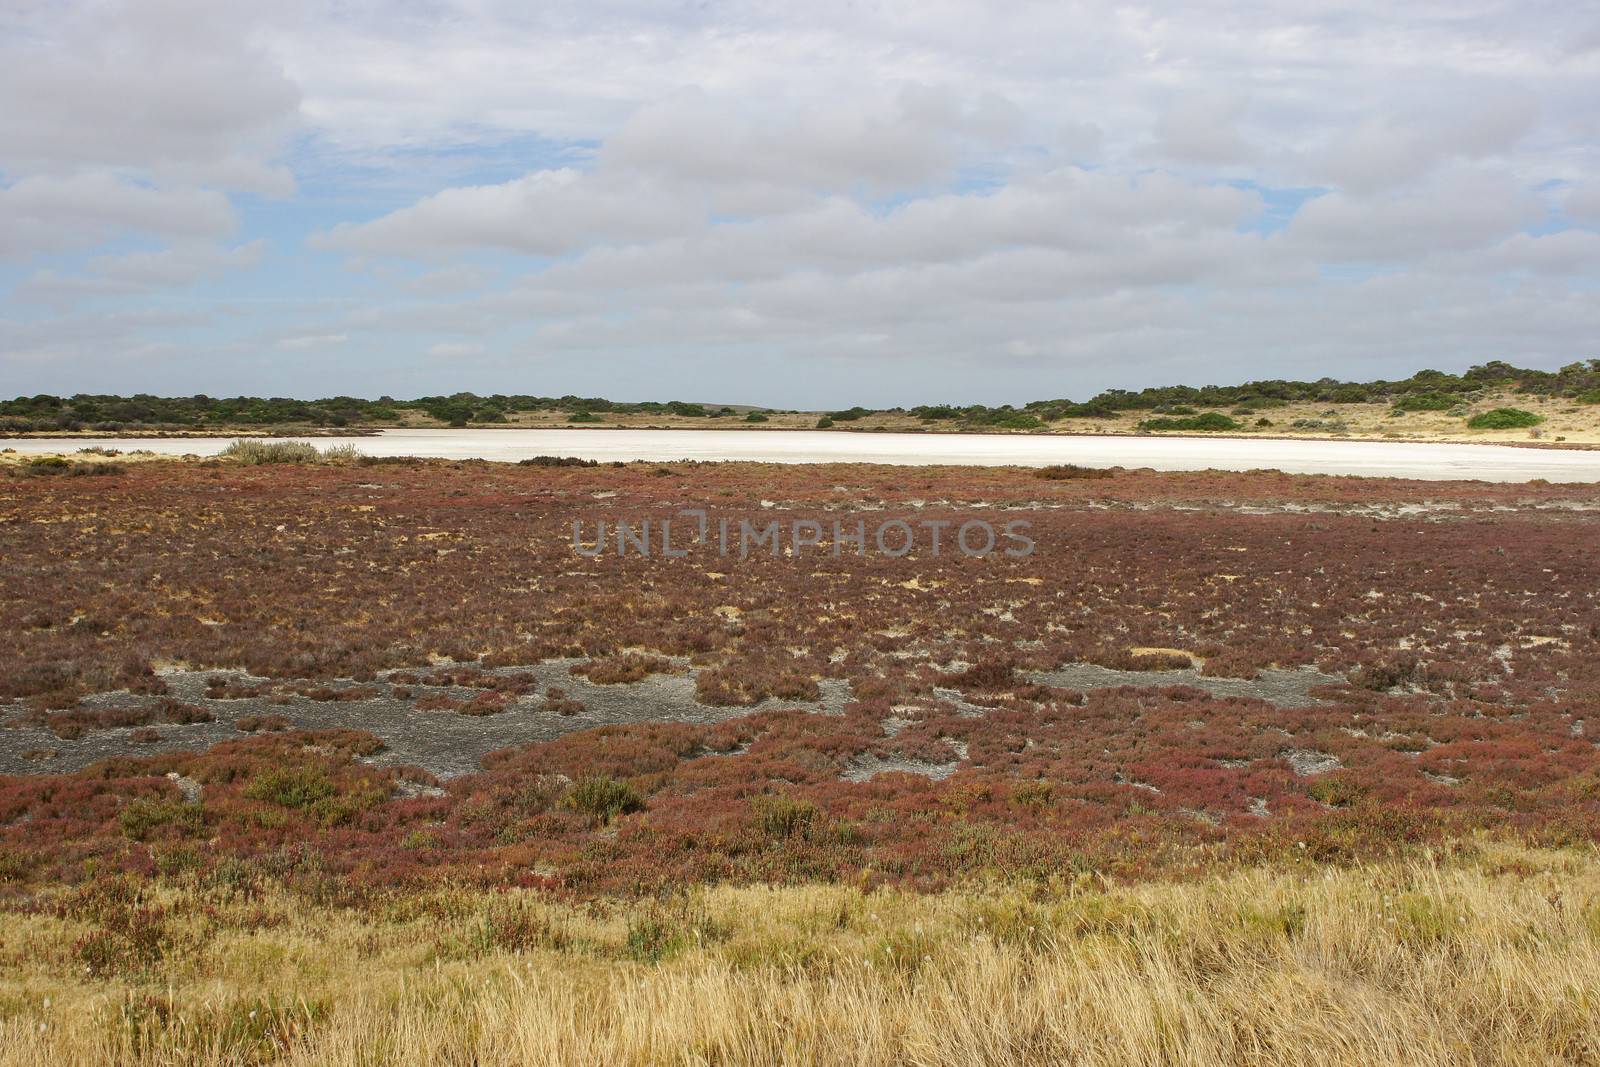 Typical landscape of Coorong National Park, Australia